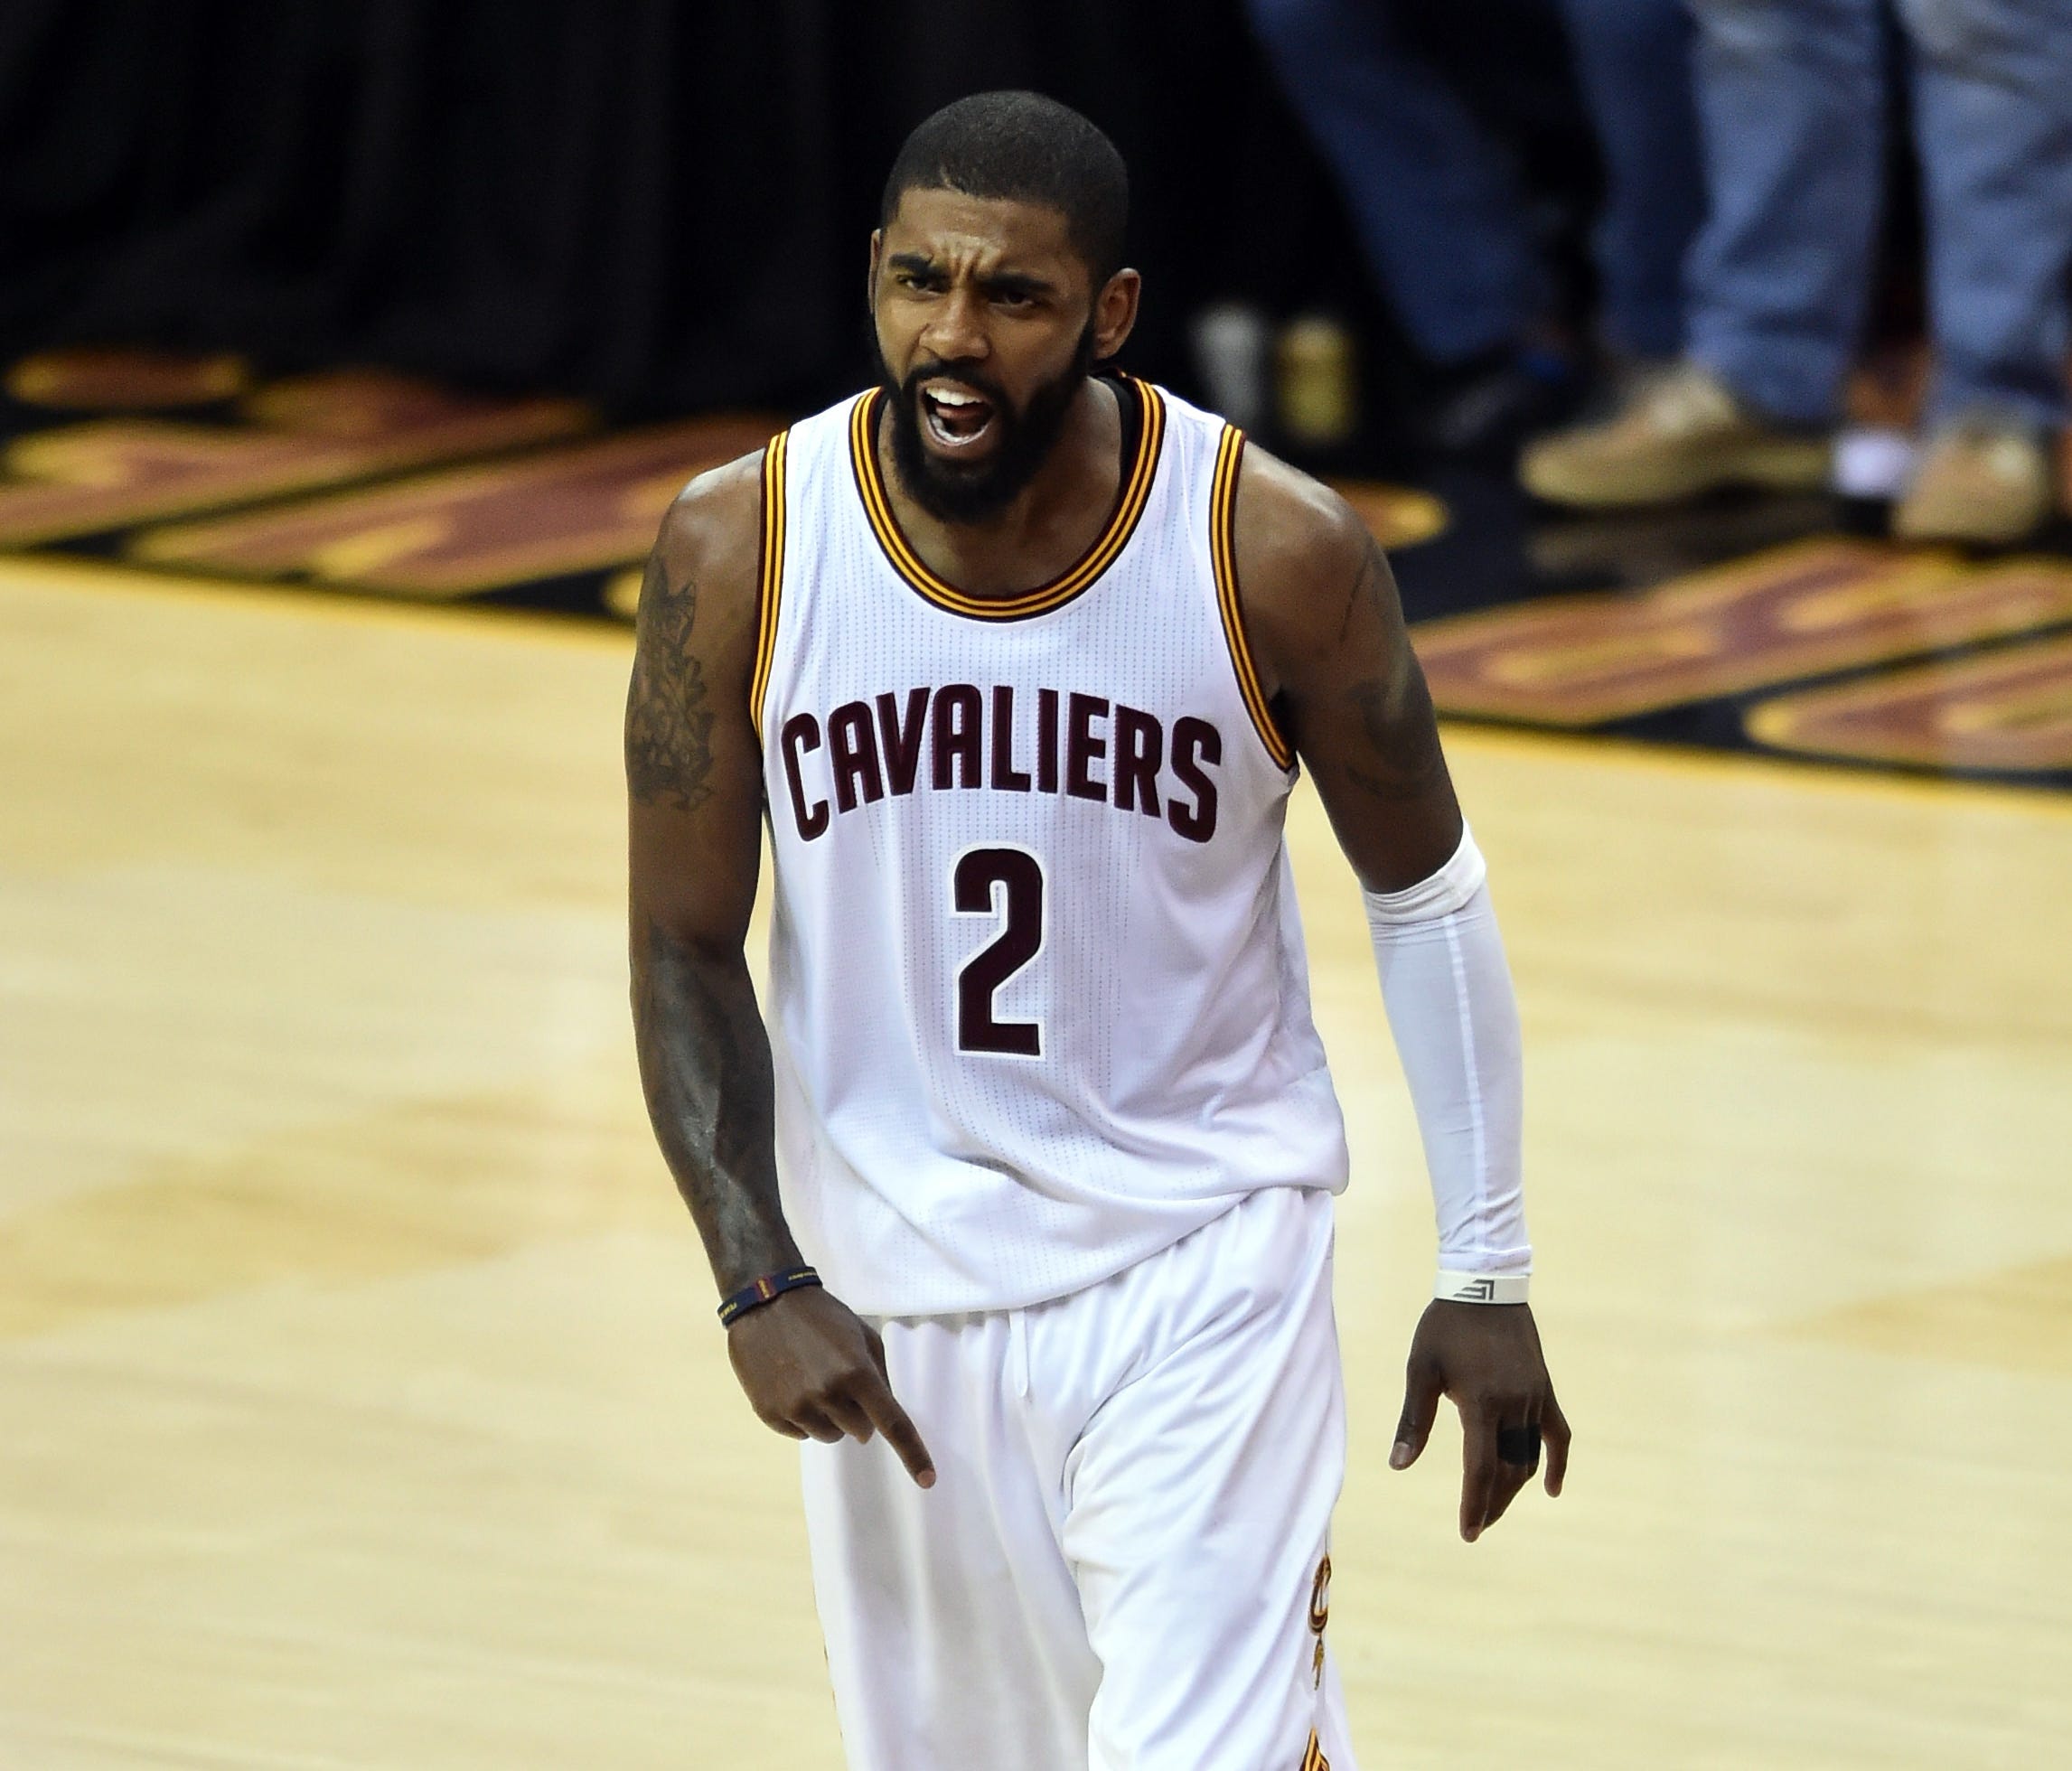 Kyrie Irving celebrates during the fourth quarter against the Golden State Warriors in Game 4 of the 2017 NBA Finals.